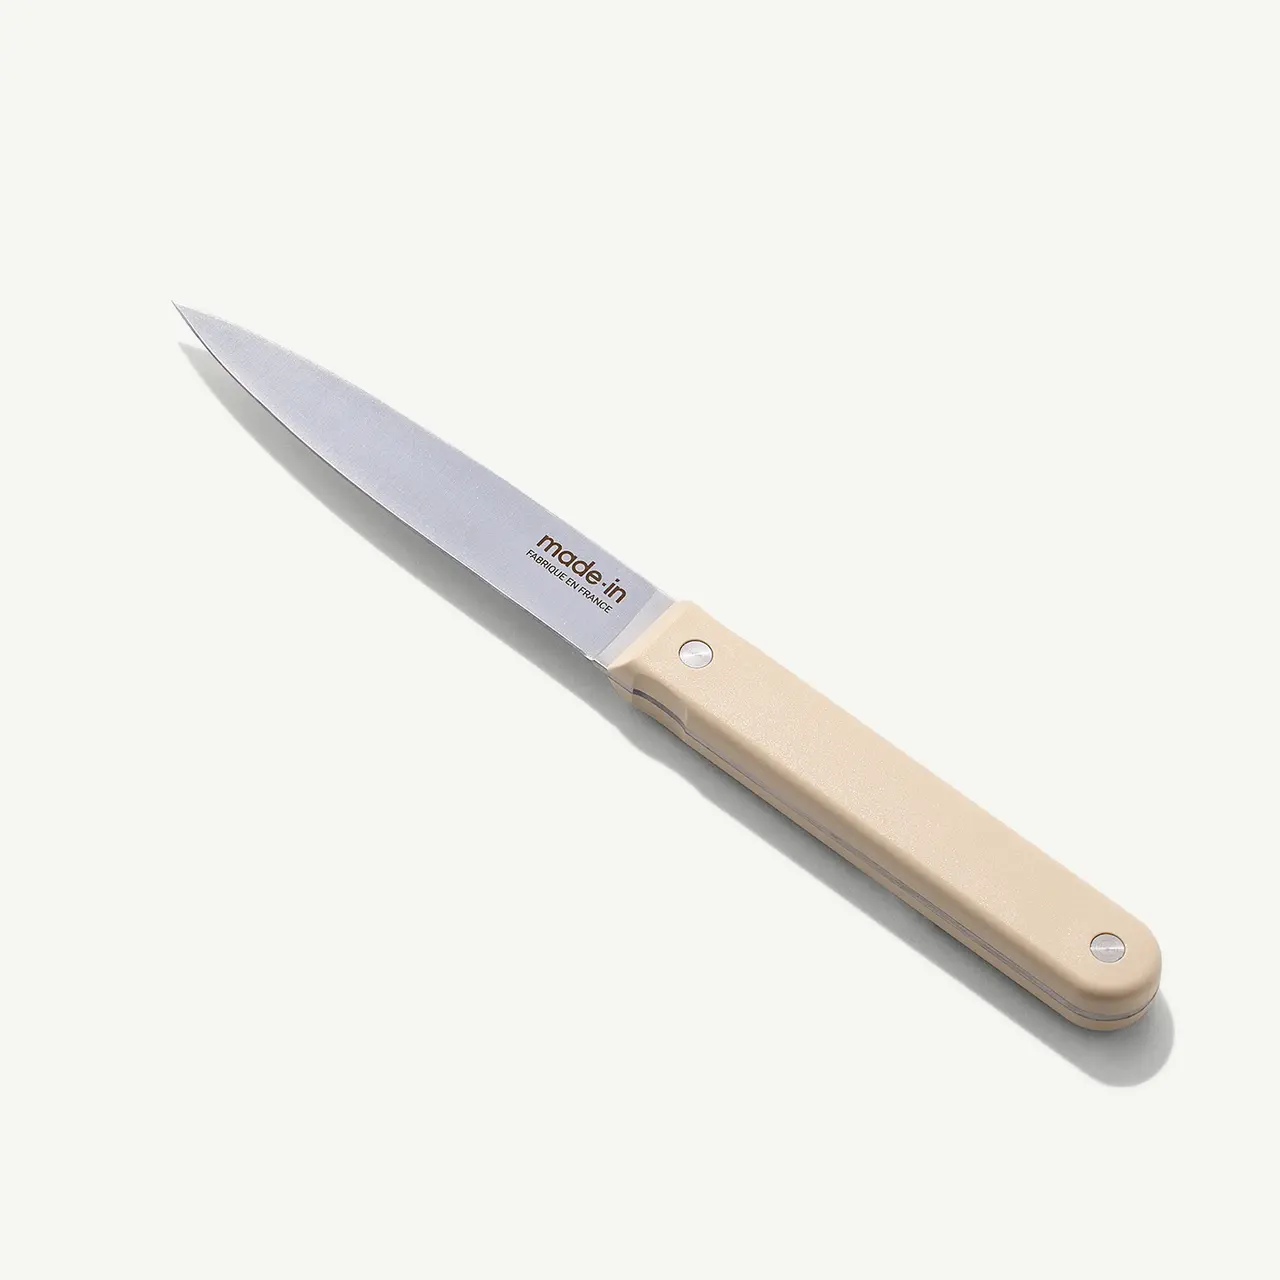 A stainless steel paring knife with a beige handle lies on a white background.